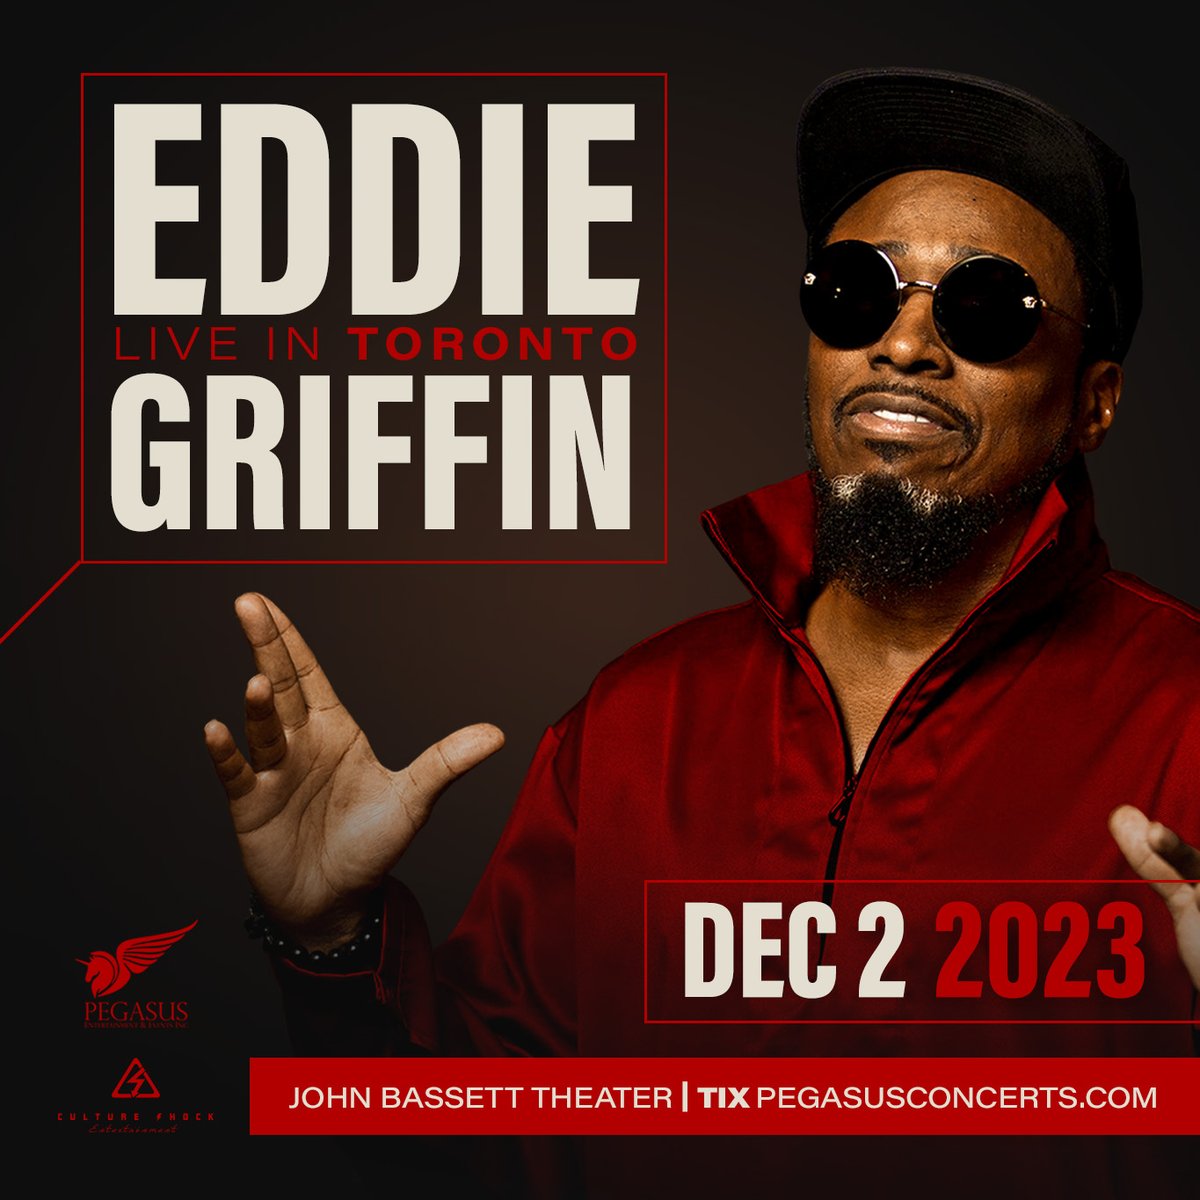 I'm excited for comedy legend @EddieGriffin's show in Toronto tomorrow night! Looks like its gonna be a packed house. @PegasusConcerts